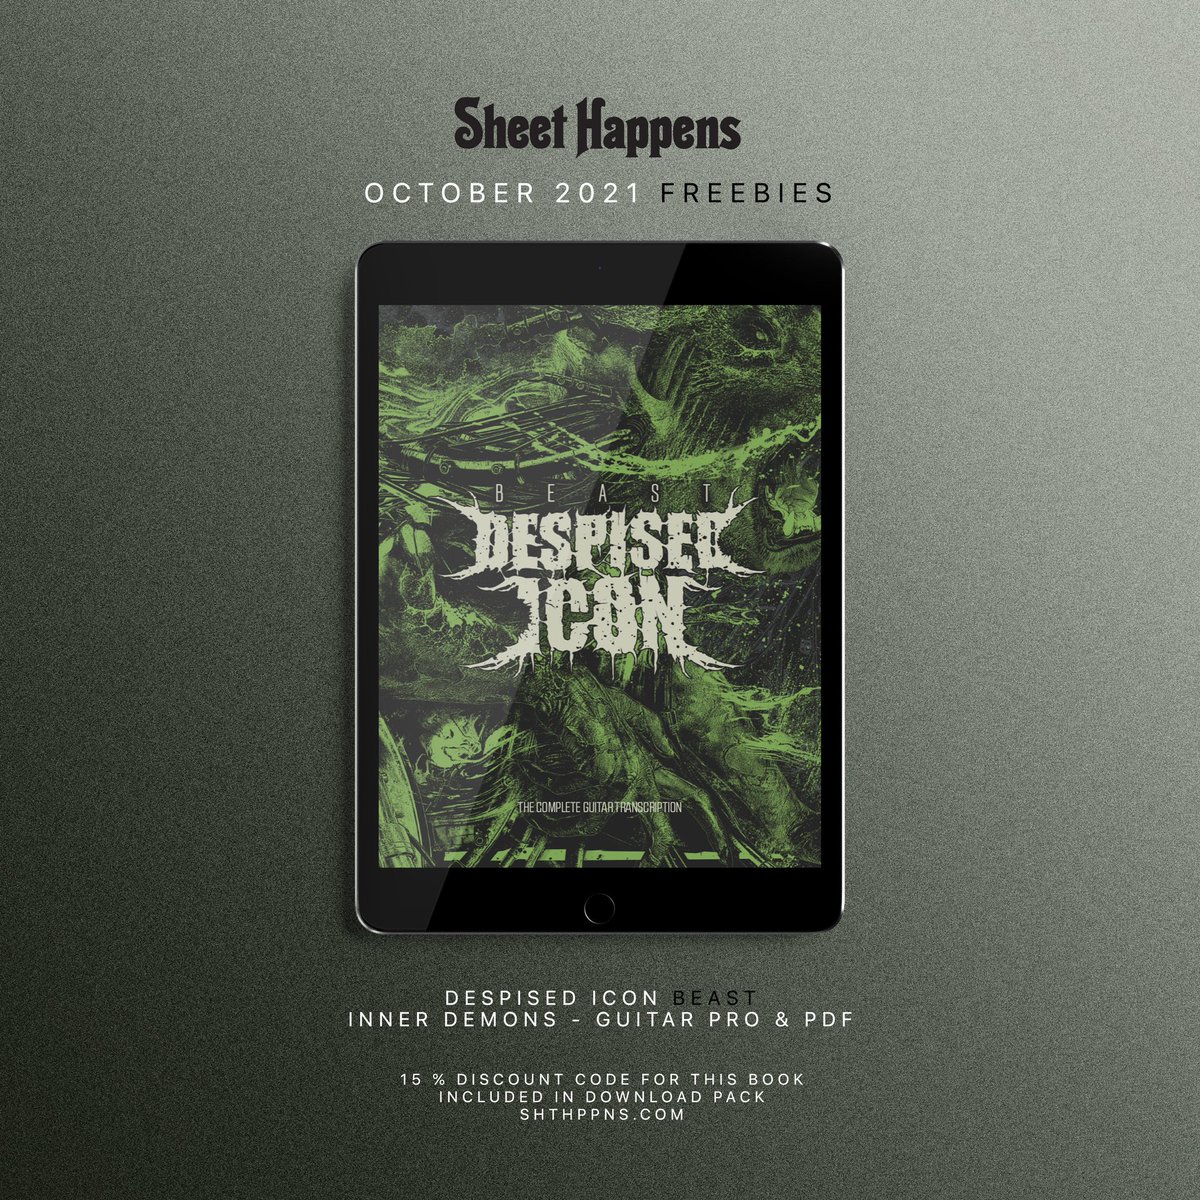 For the entire month of October, we’re offering you free PDF tabs & Guitar Pro files to the song “Inner Demons”, as well as a 15% discount to the “Beast” guitar transcription book! Head over to @sheethappenspub to grab your freebie 🎸 shthppns.com/freebies